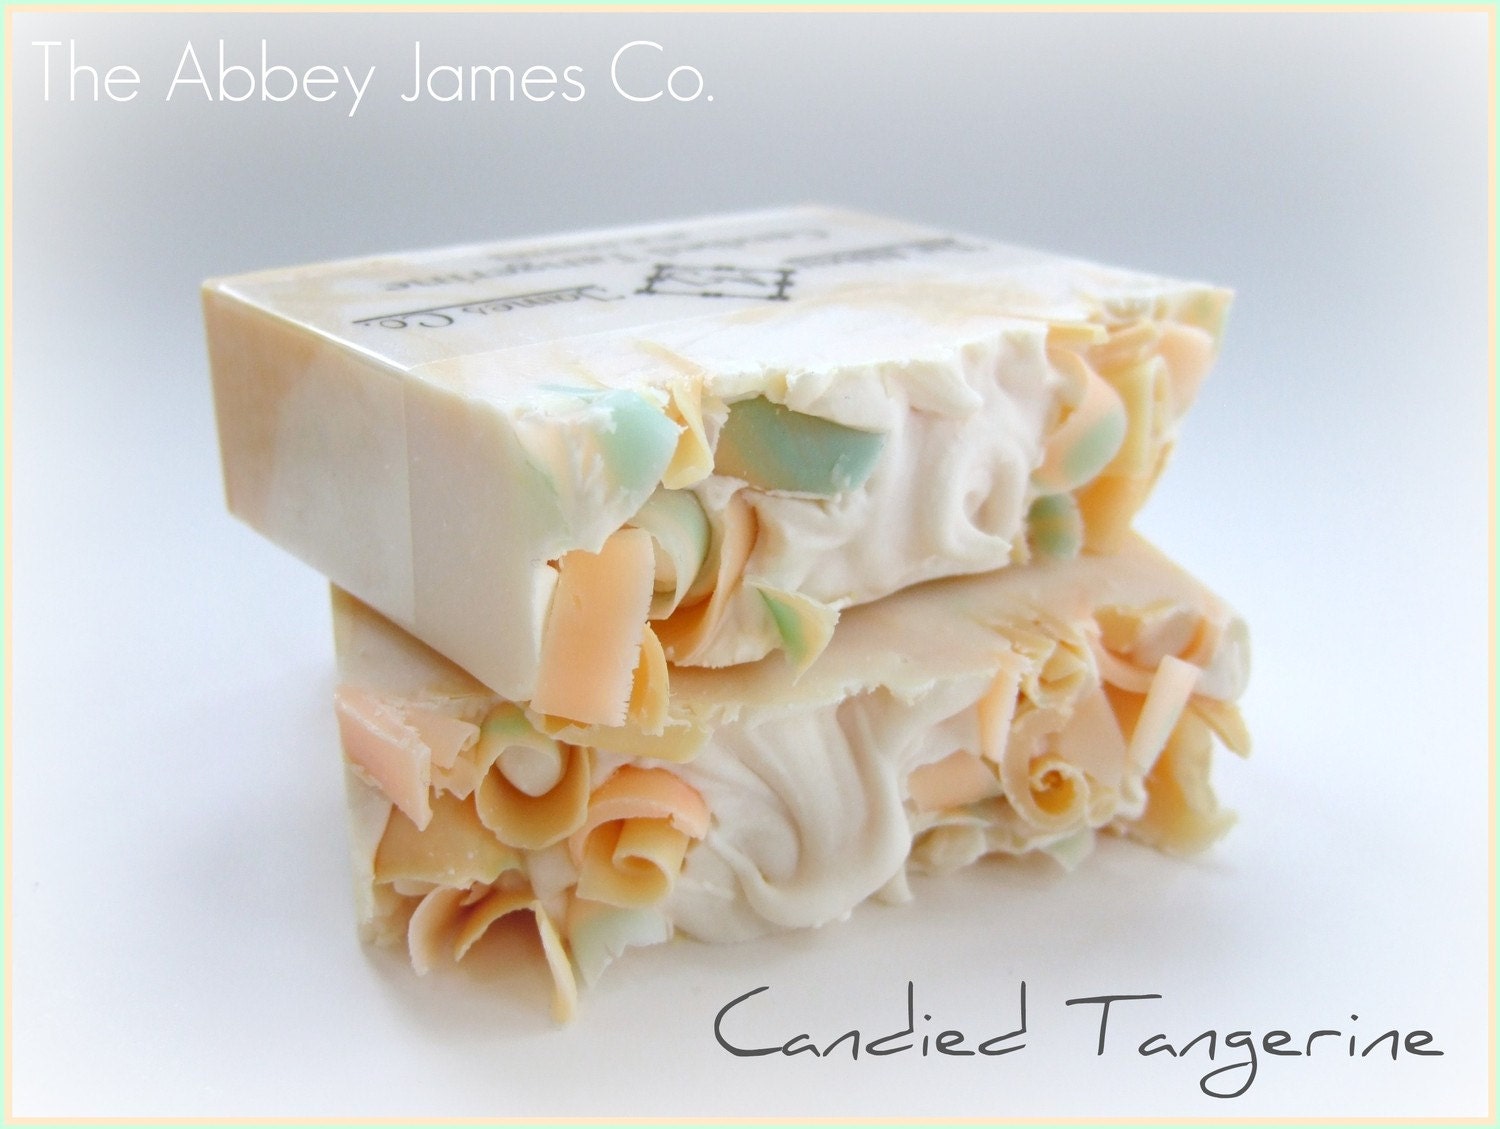 Candied Tangerine Gourmet Soap